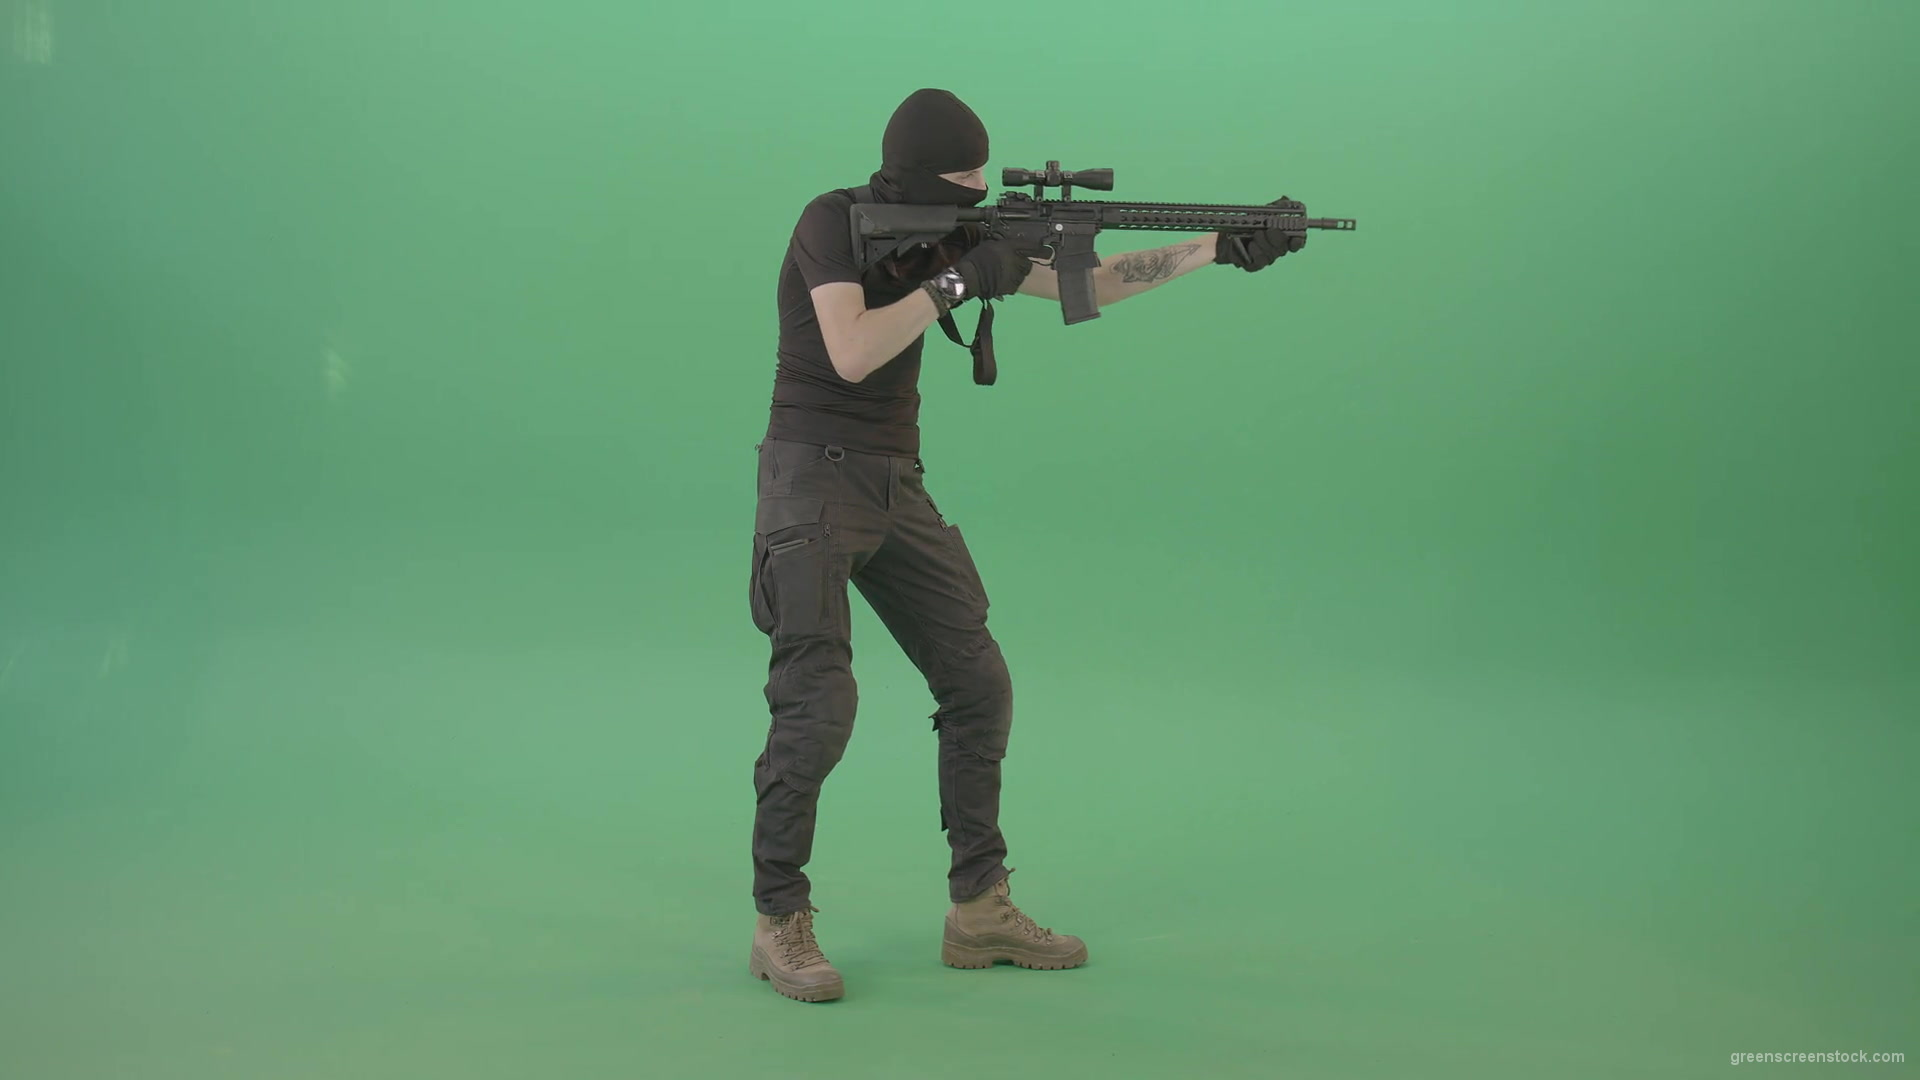 Army-soldier-shooting-with-gun-on-green-screen-4K-Video-Clip-1920_002 Green Screen Stock